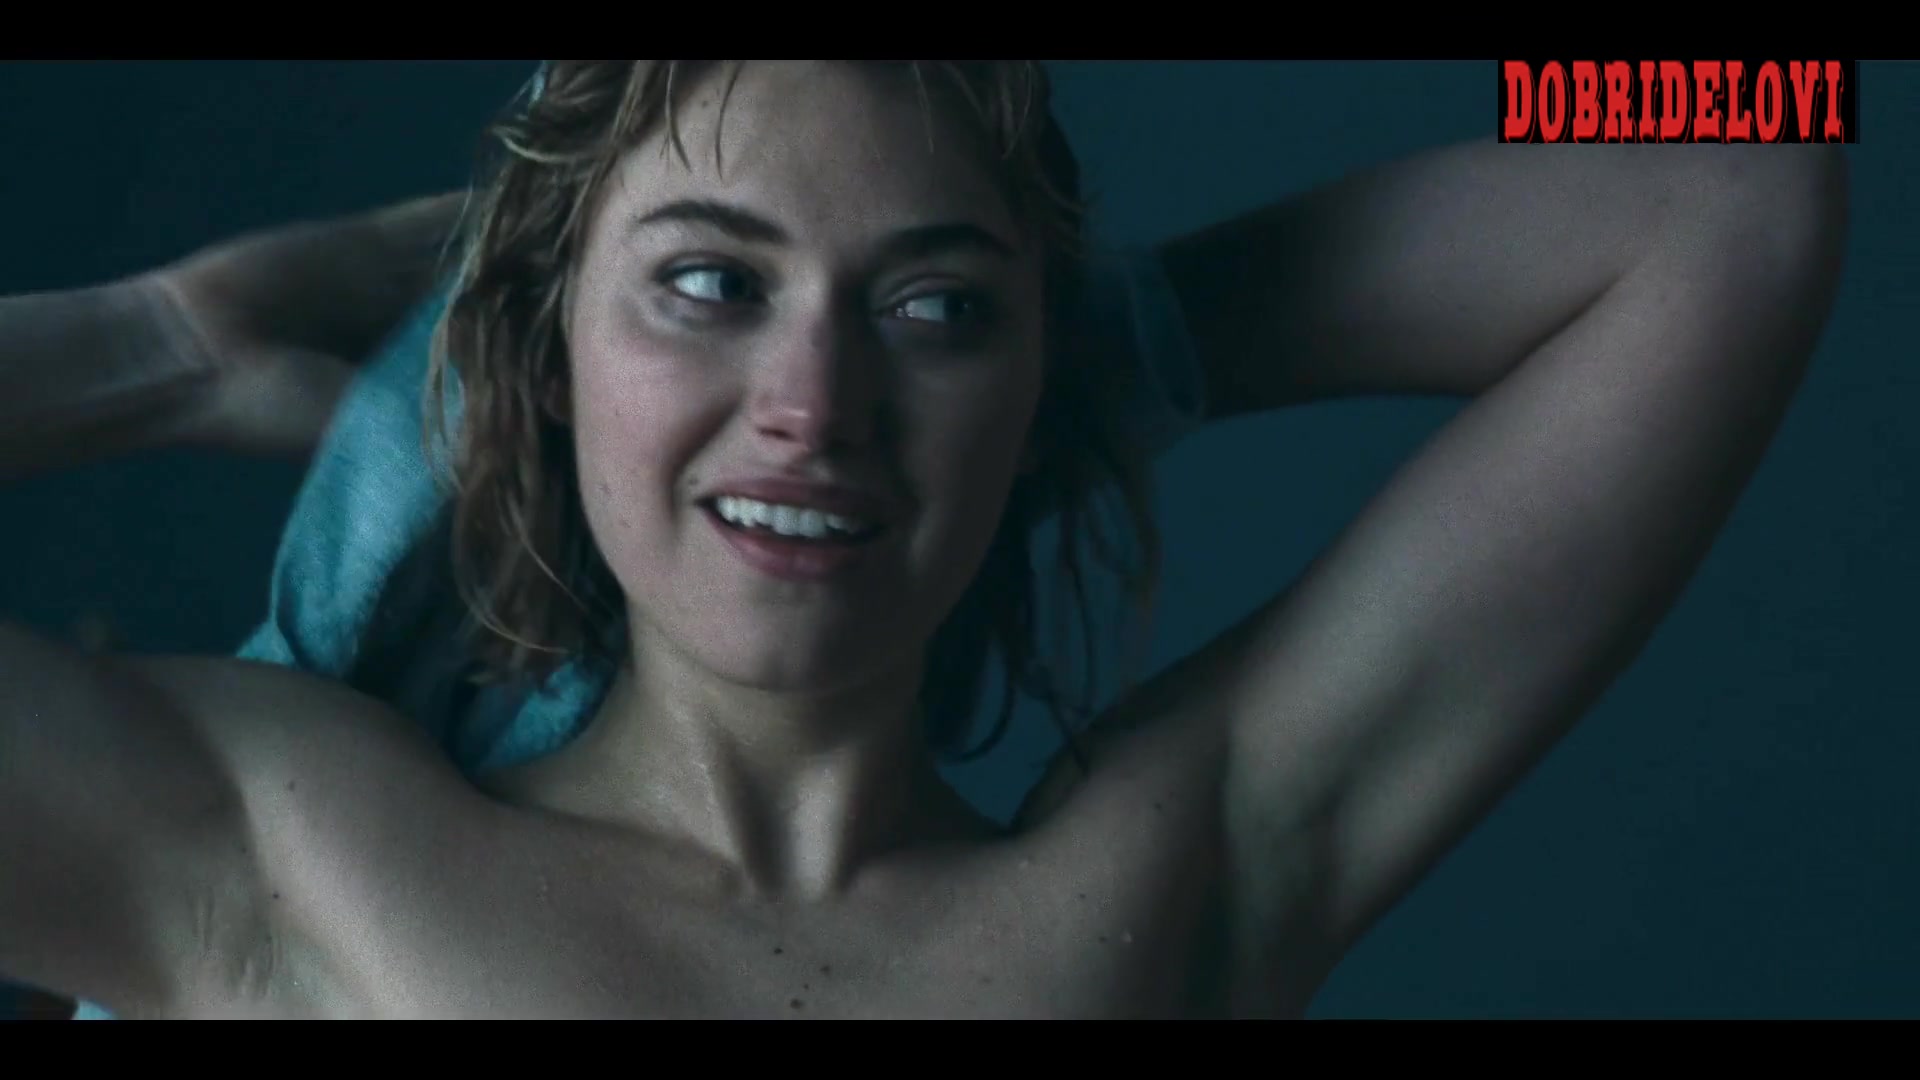 Imogen Poots morning after scene with Mark Ruffalo from I Know This Much is True